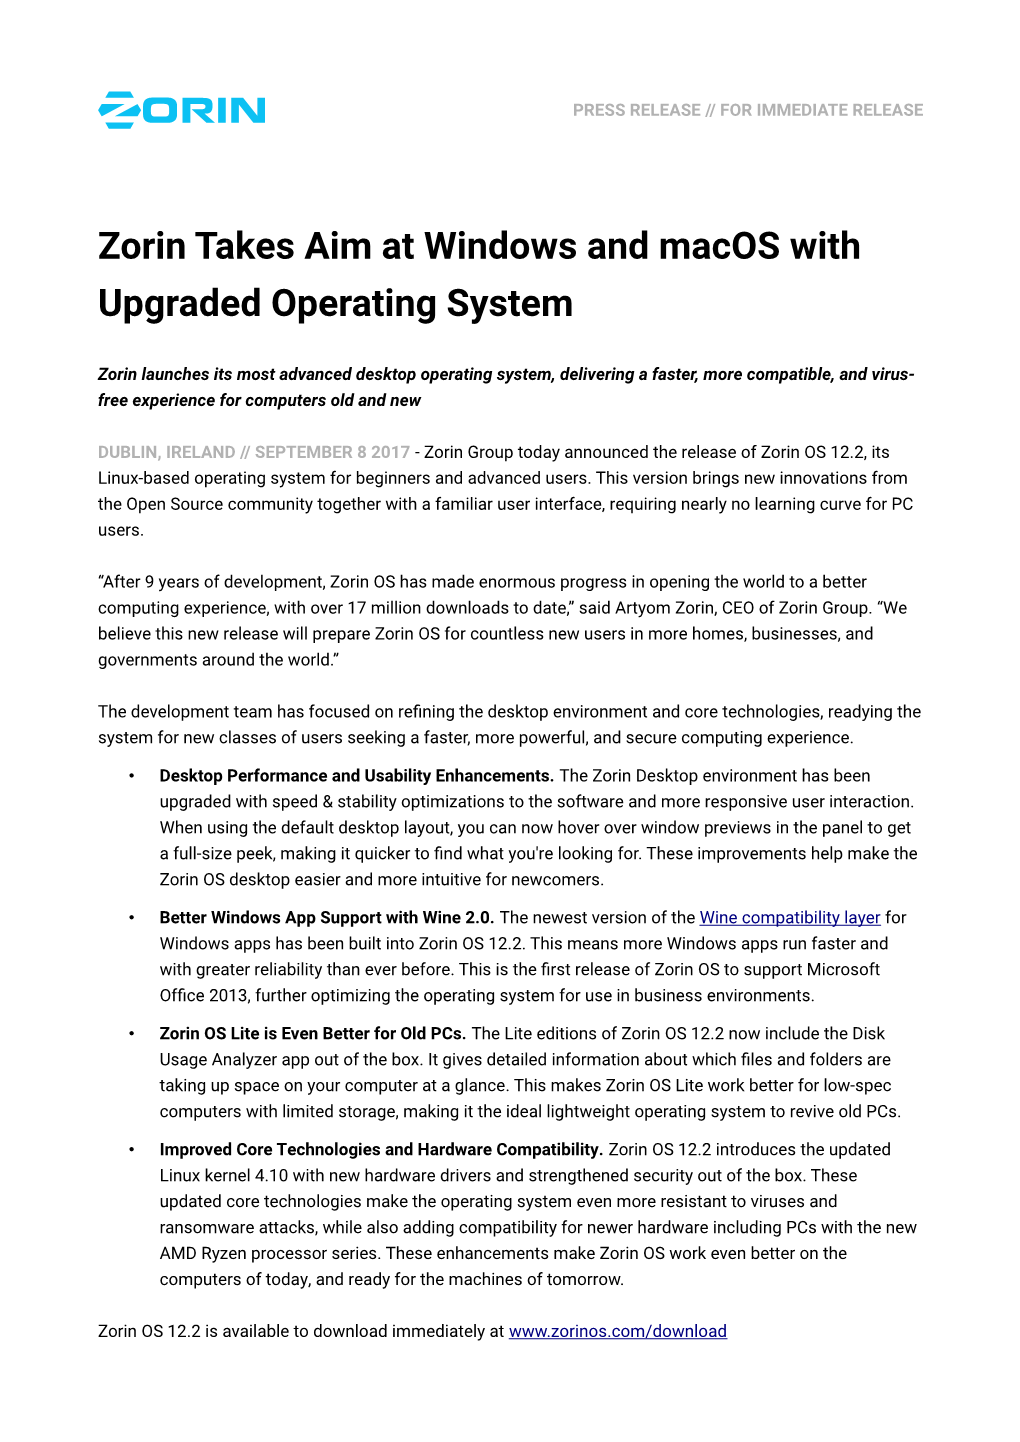 Zorin Takes Aim at Windows and Macos with Upgraded Operating System